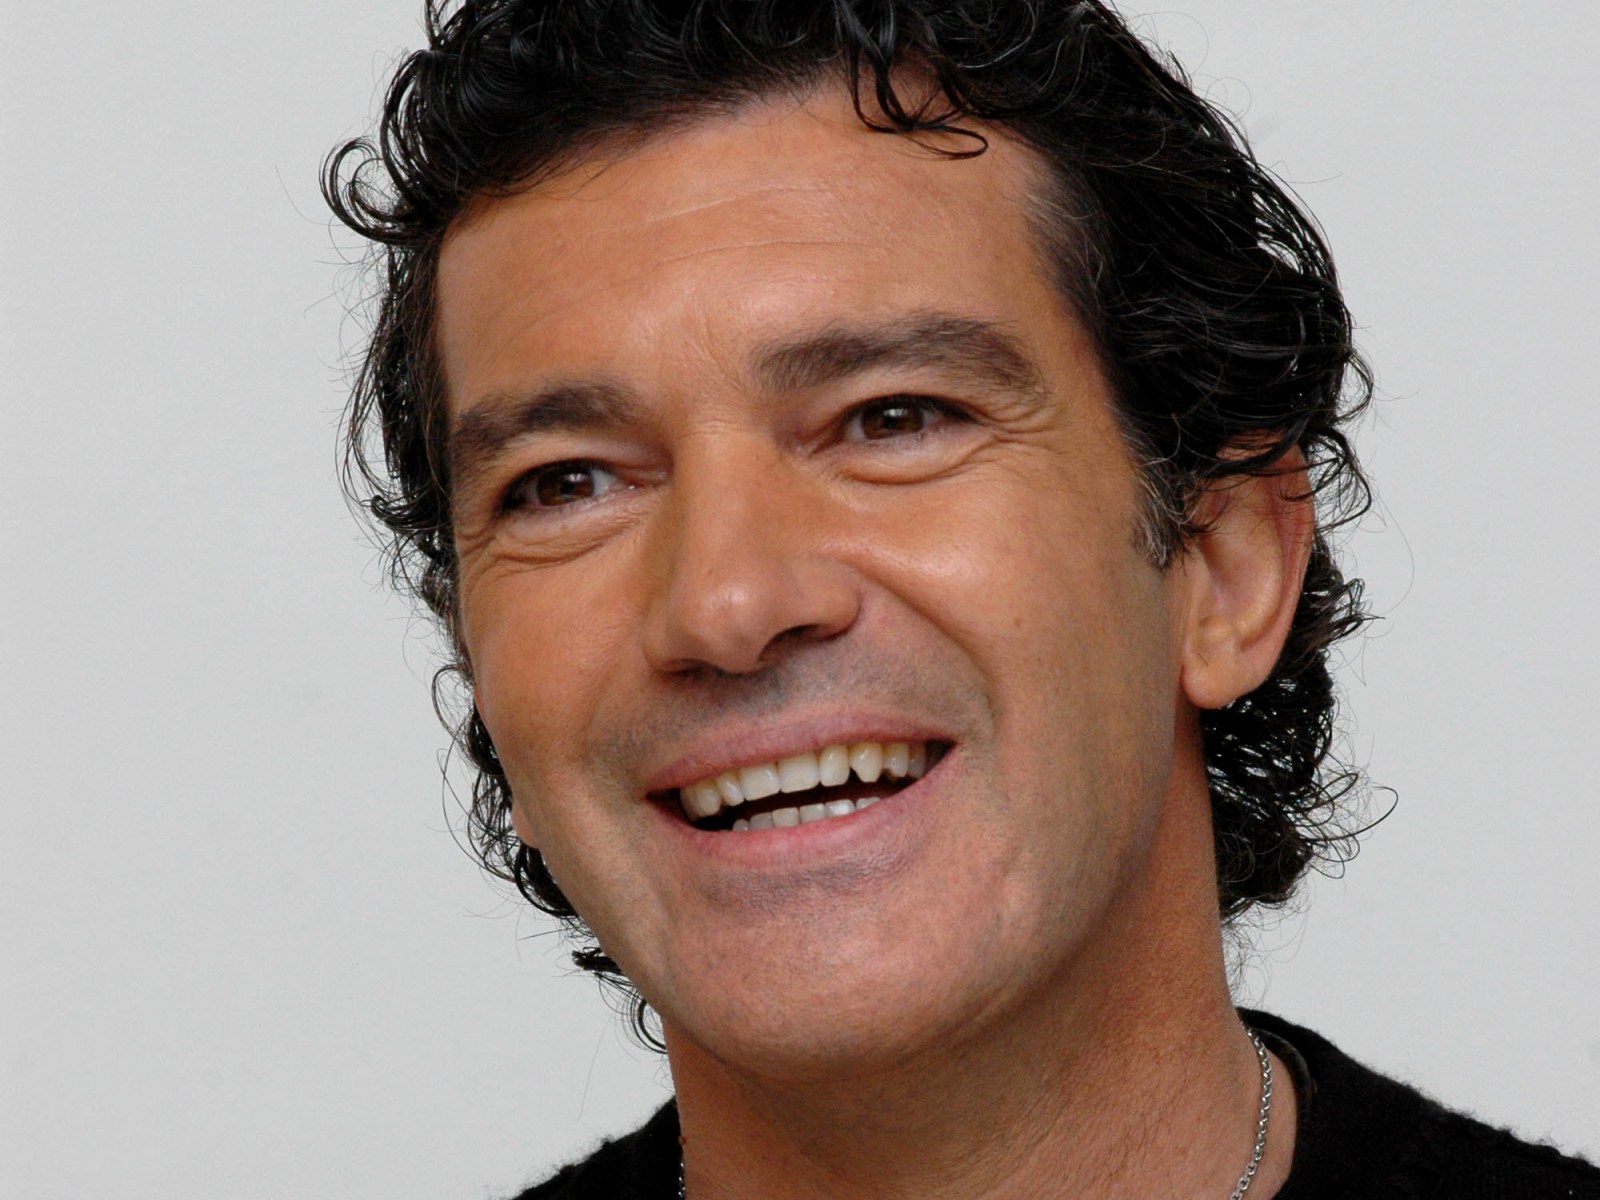 What Do You Know About Antonio Banderas? - ProProfs Quiz1600 x 1200